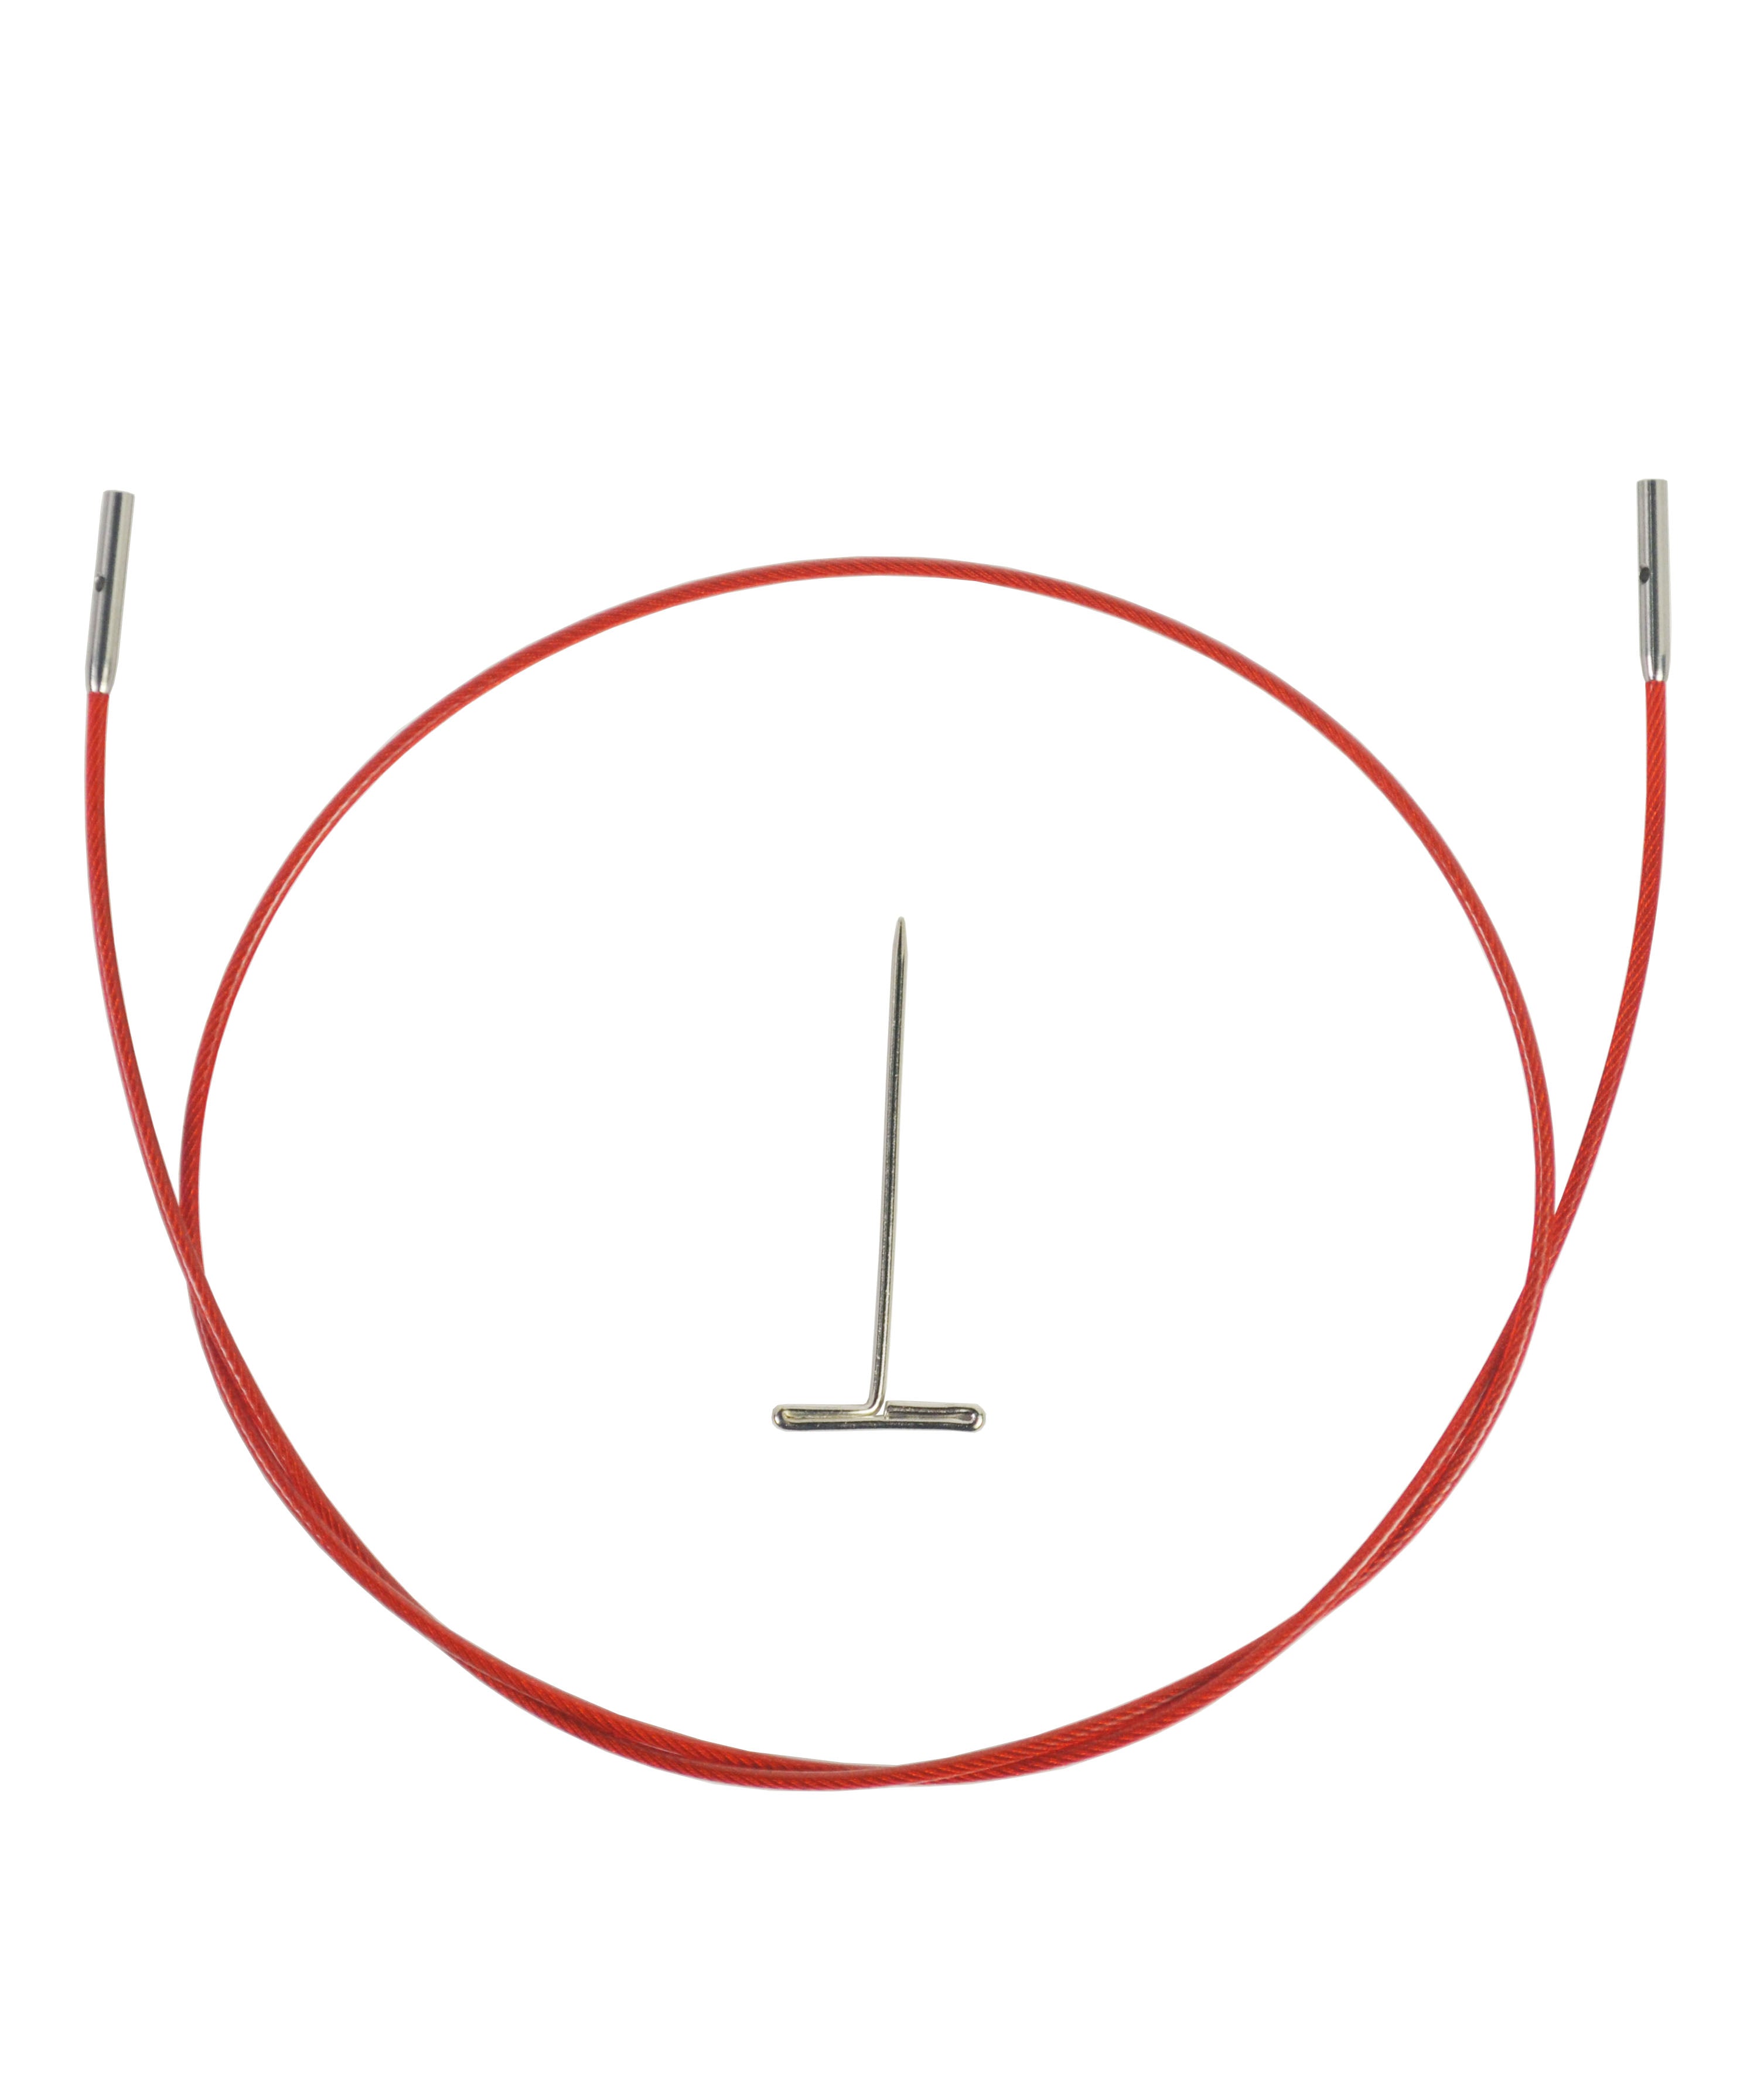 Knitting Needle Circular Interchangeable Cable - ChiaoGoo TWIST Red Lace